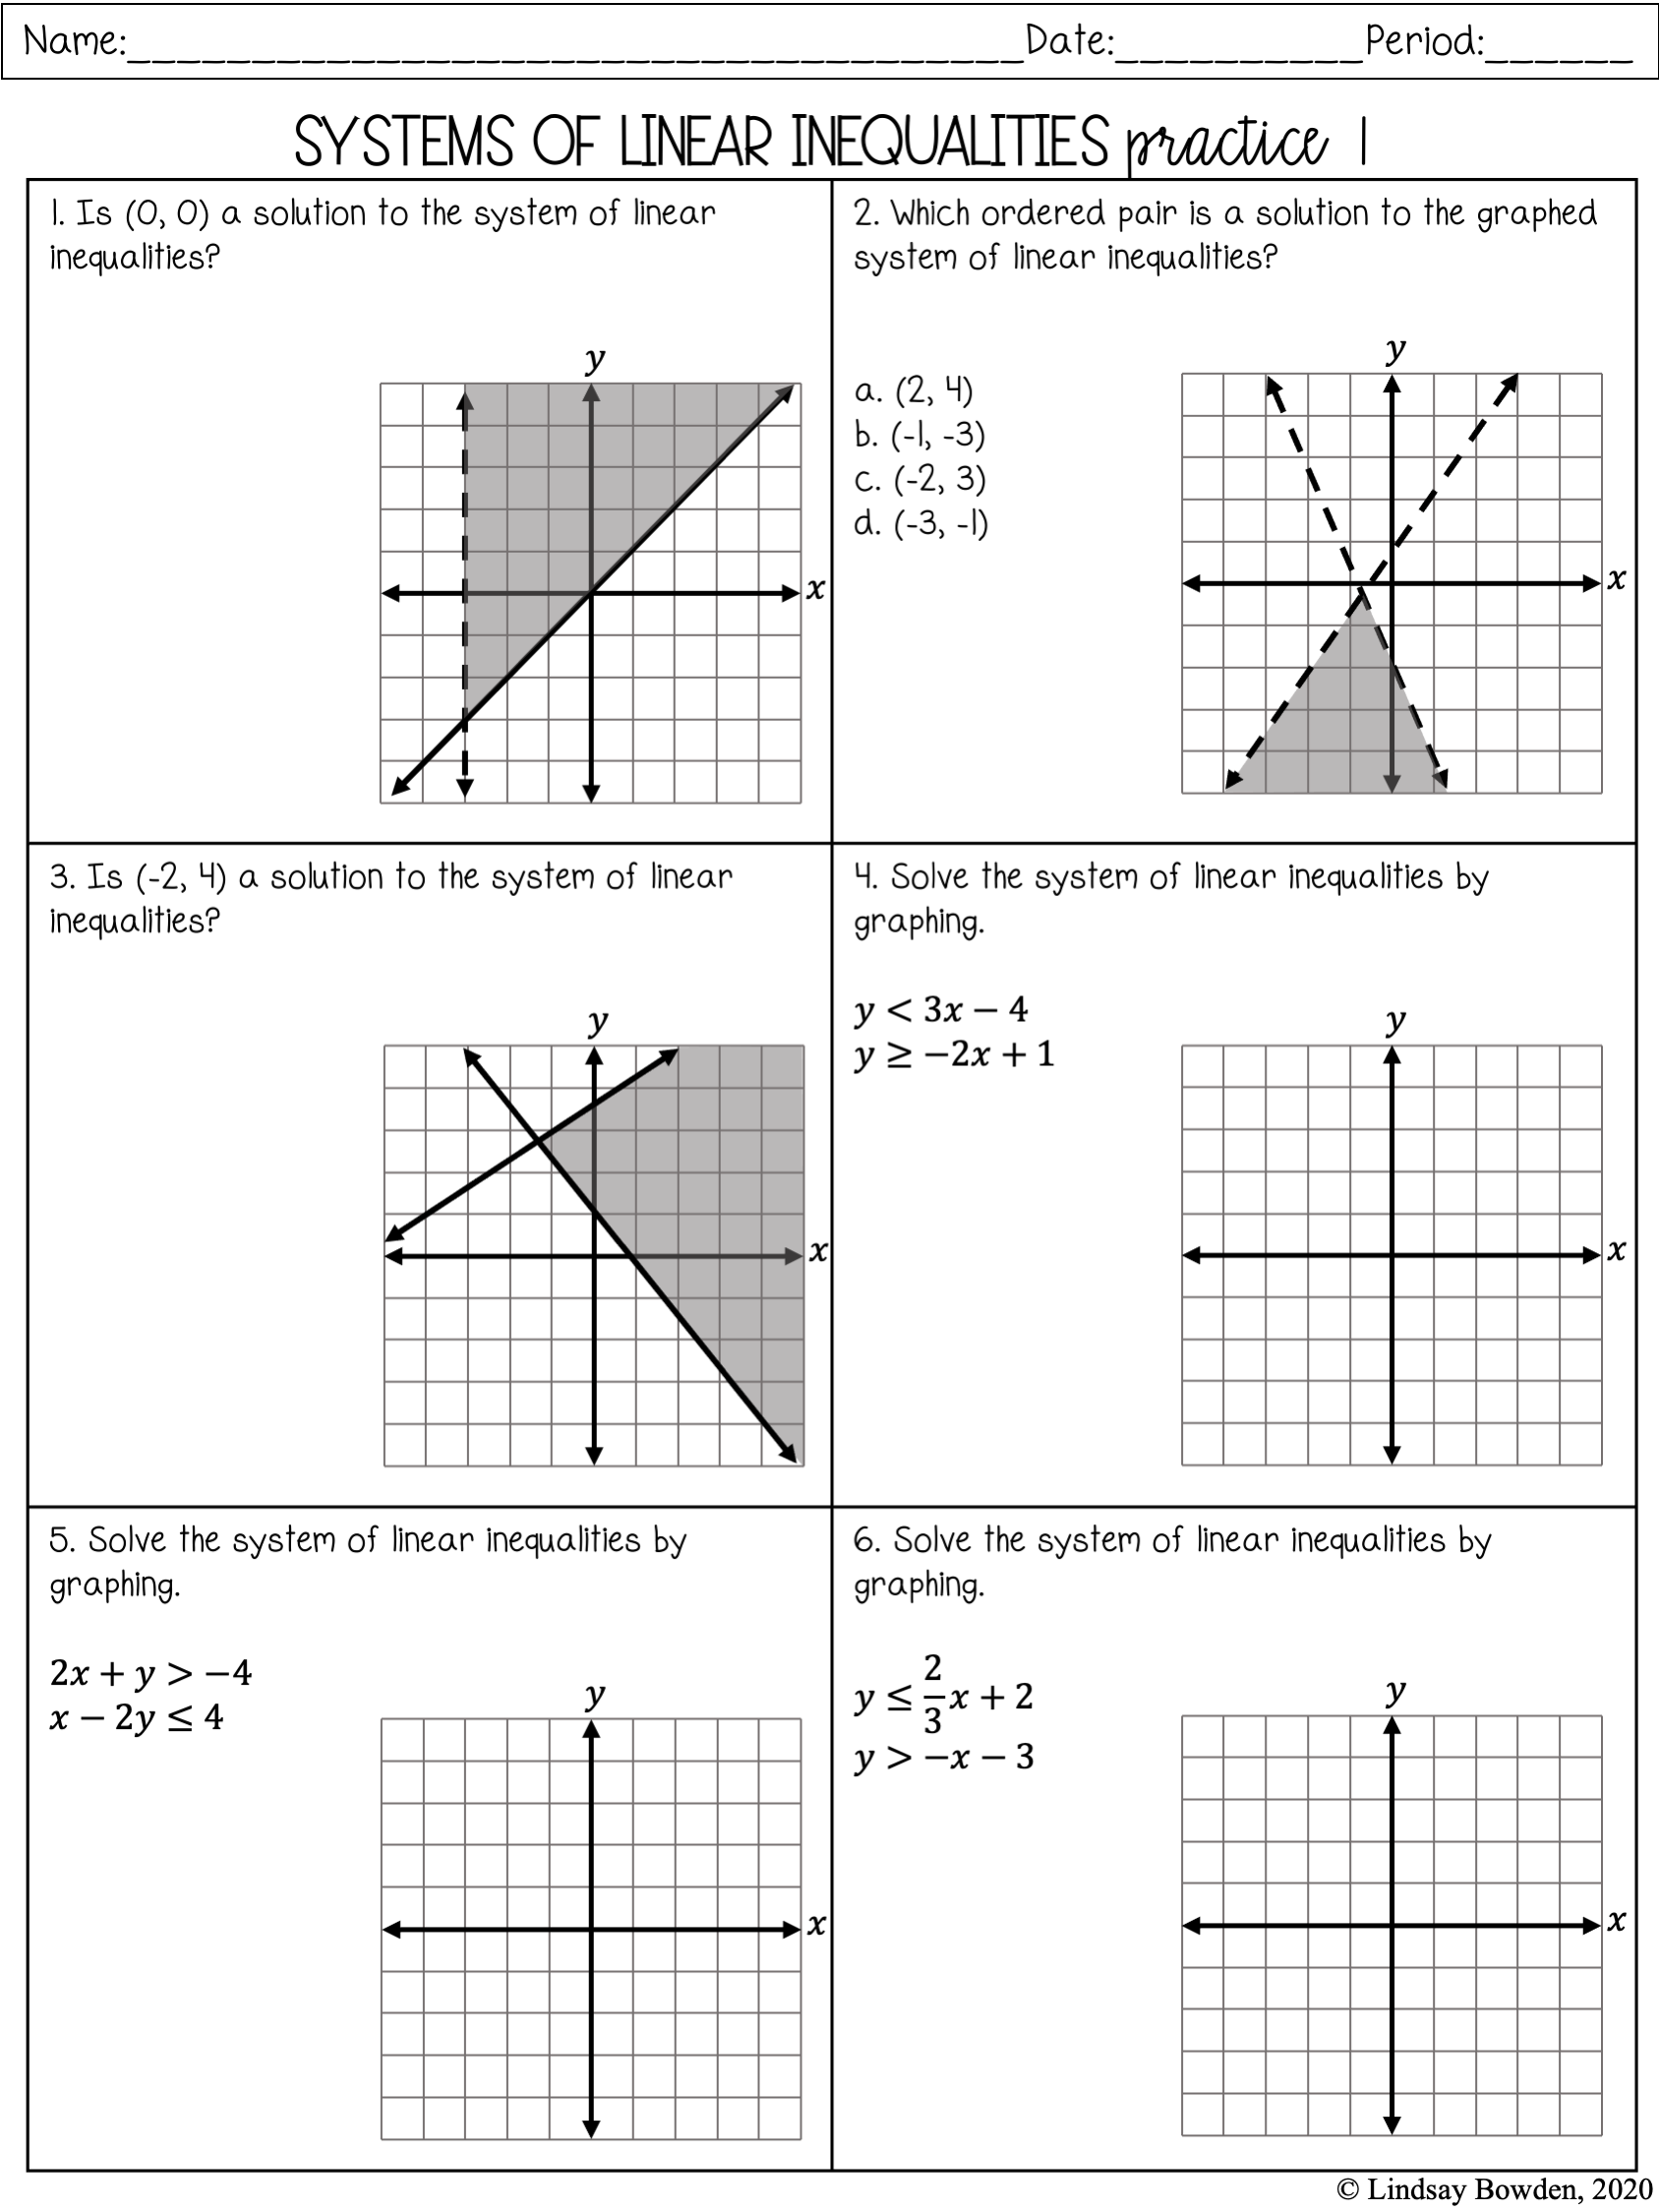 Linear Systems Notes and Worksheets - Lindsay Bowden With Regard To Systems Of Linear Inequalities Worksheet